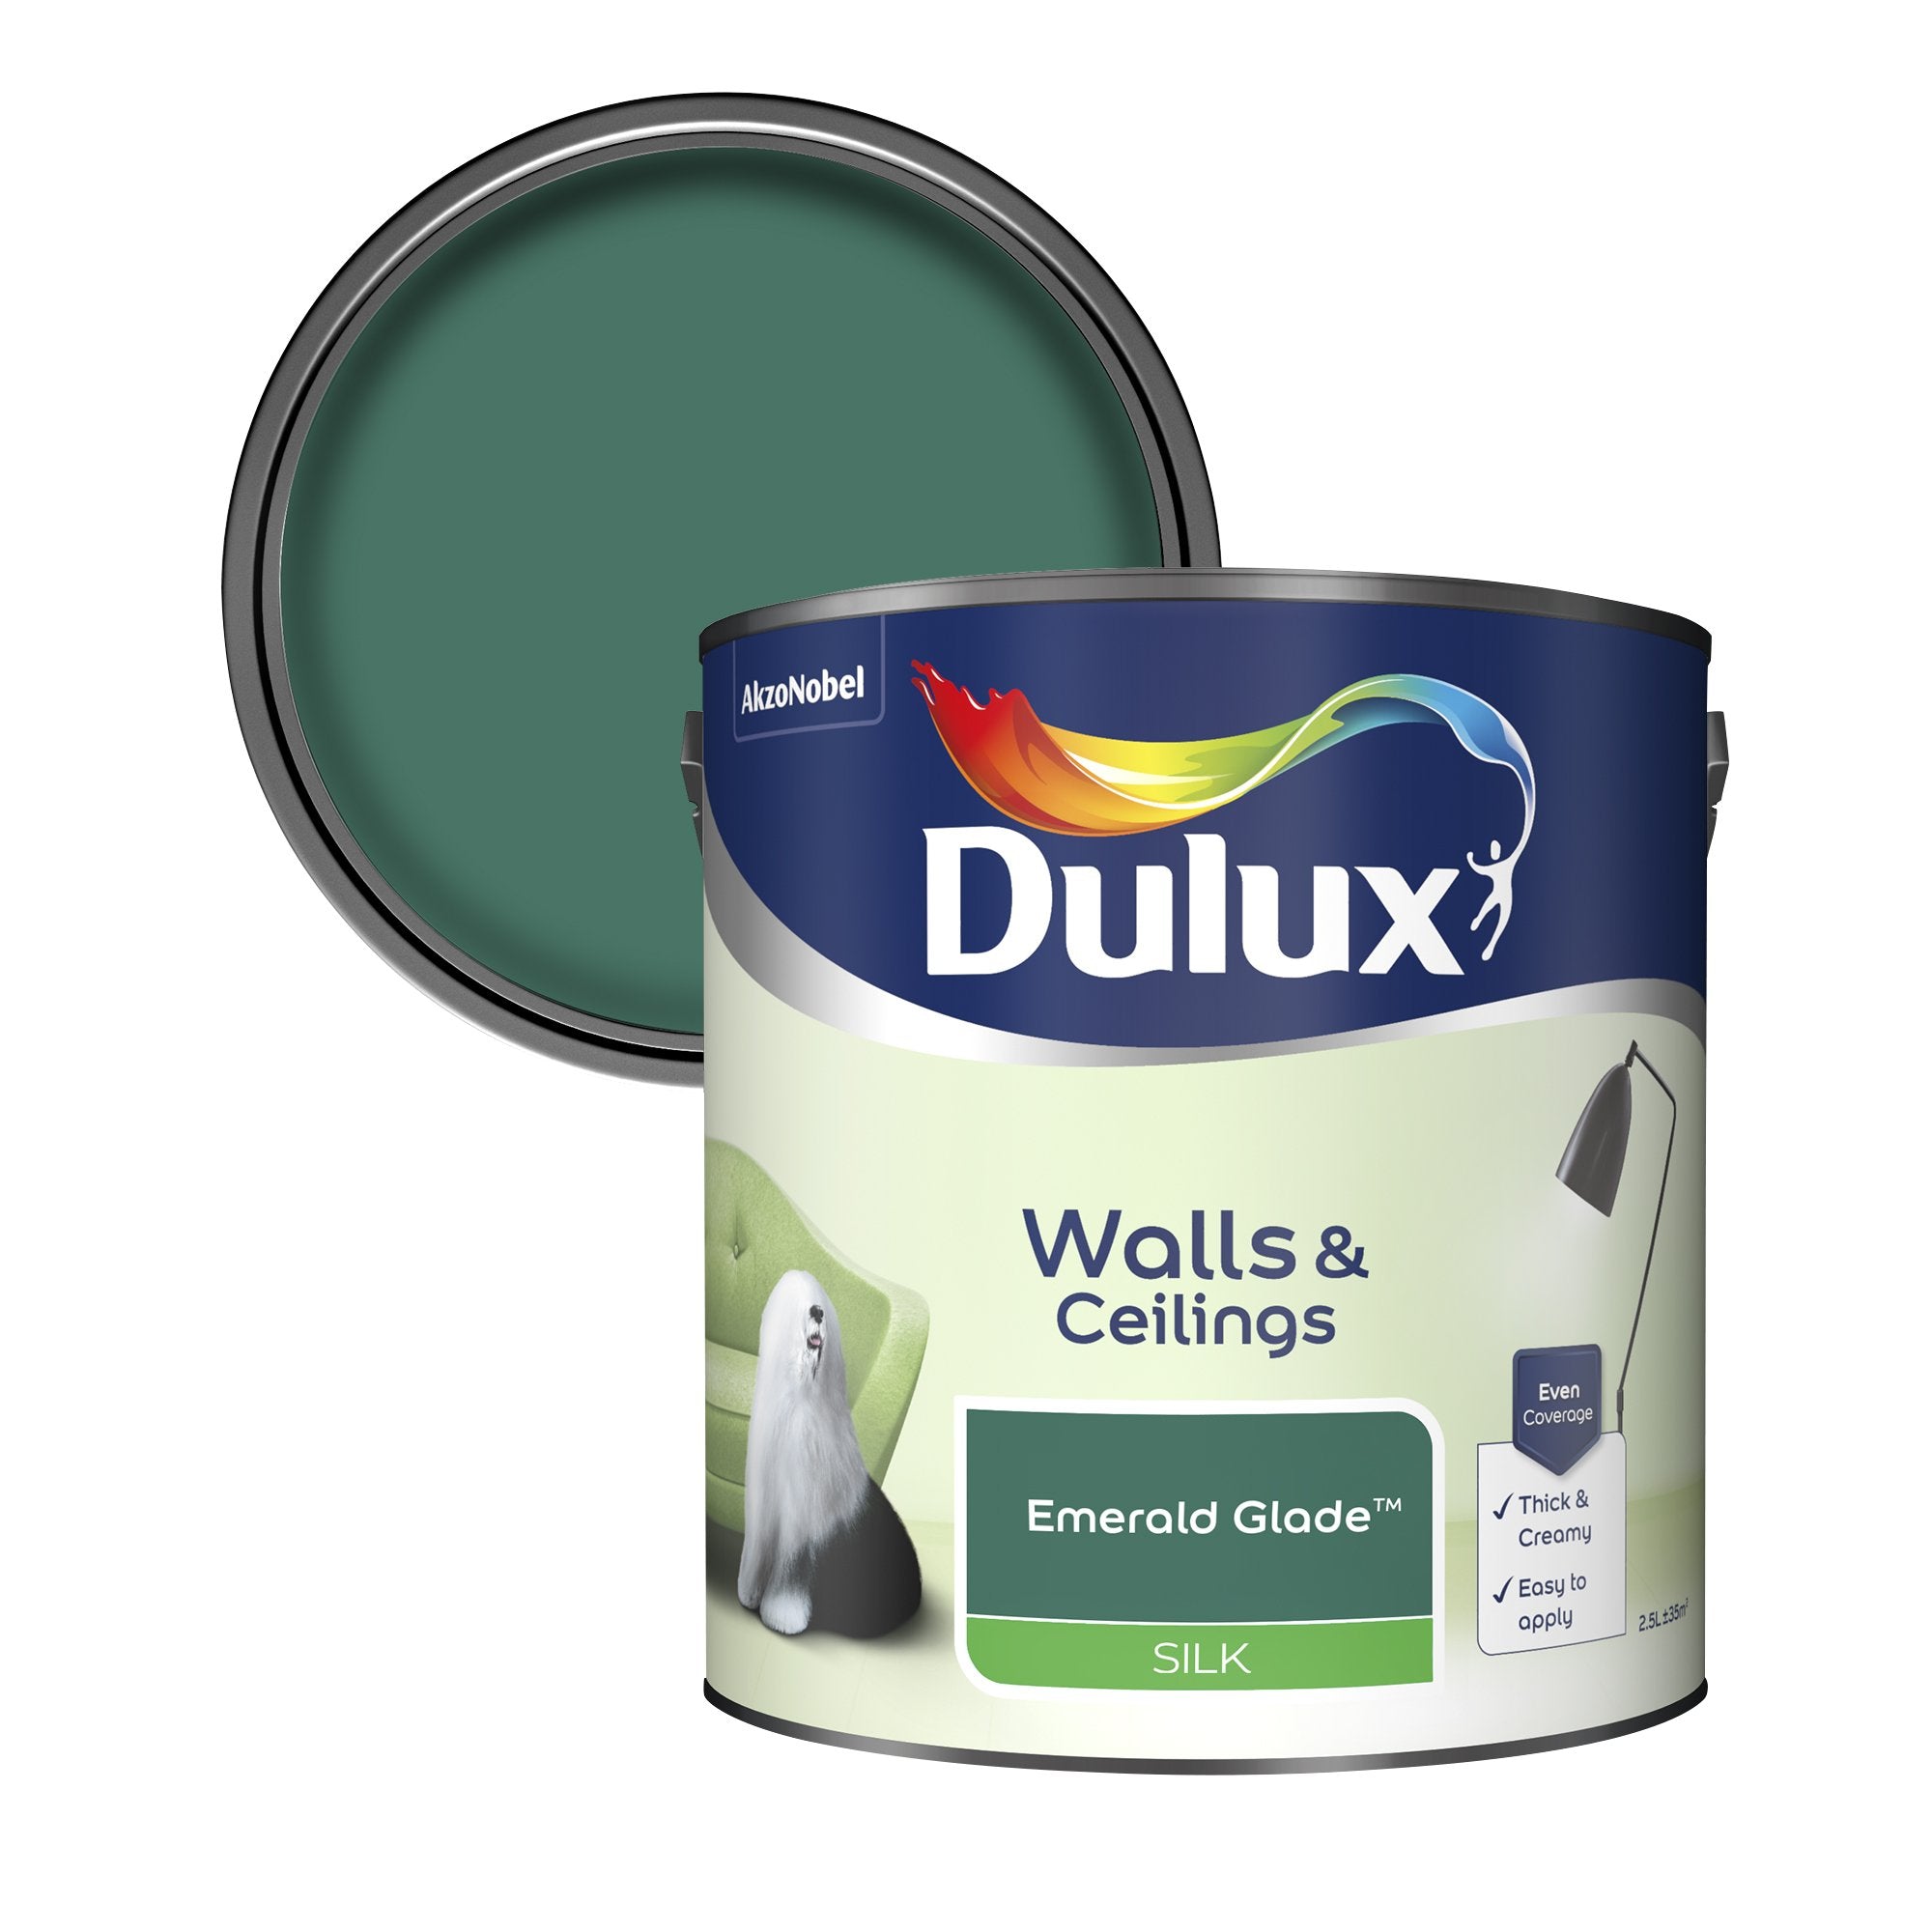 Dulux-Silk-Emulsion-Paint-For-Walls-And-Ceilings-Emerald-Glade-2.5L